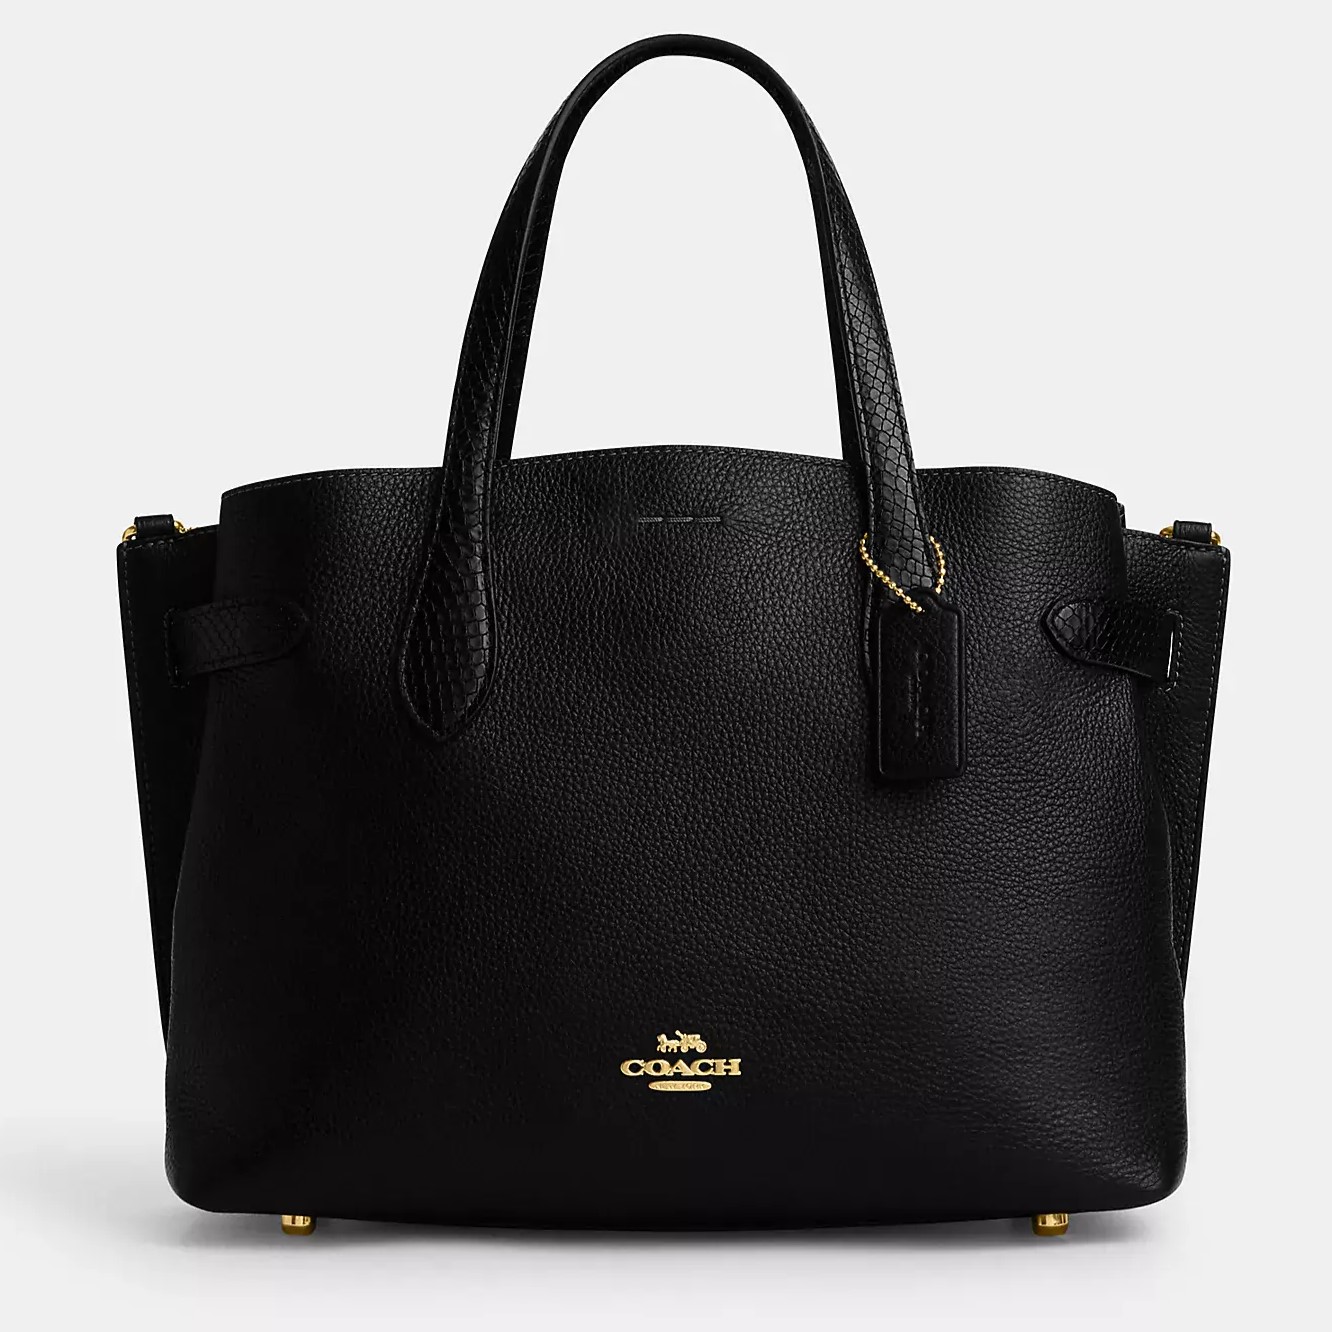 TÚI XÁCH NỮ COACH HANNA CARRYALL REFINED PEBBLE LEATHER AND SNAKE EMBOSSED LEATHER CH187 5